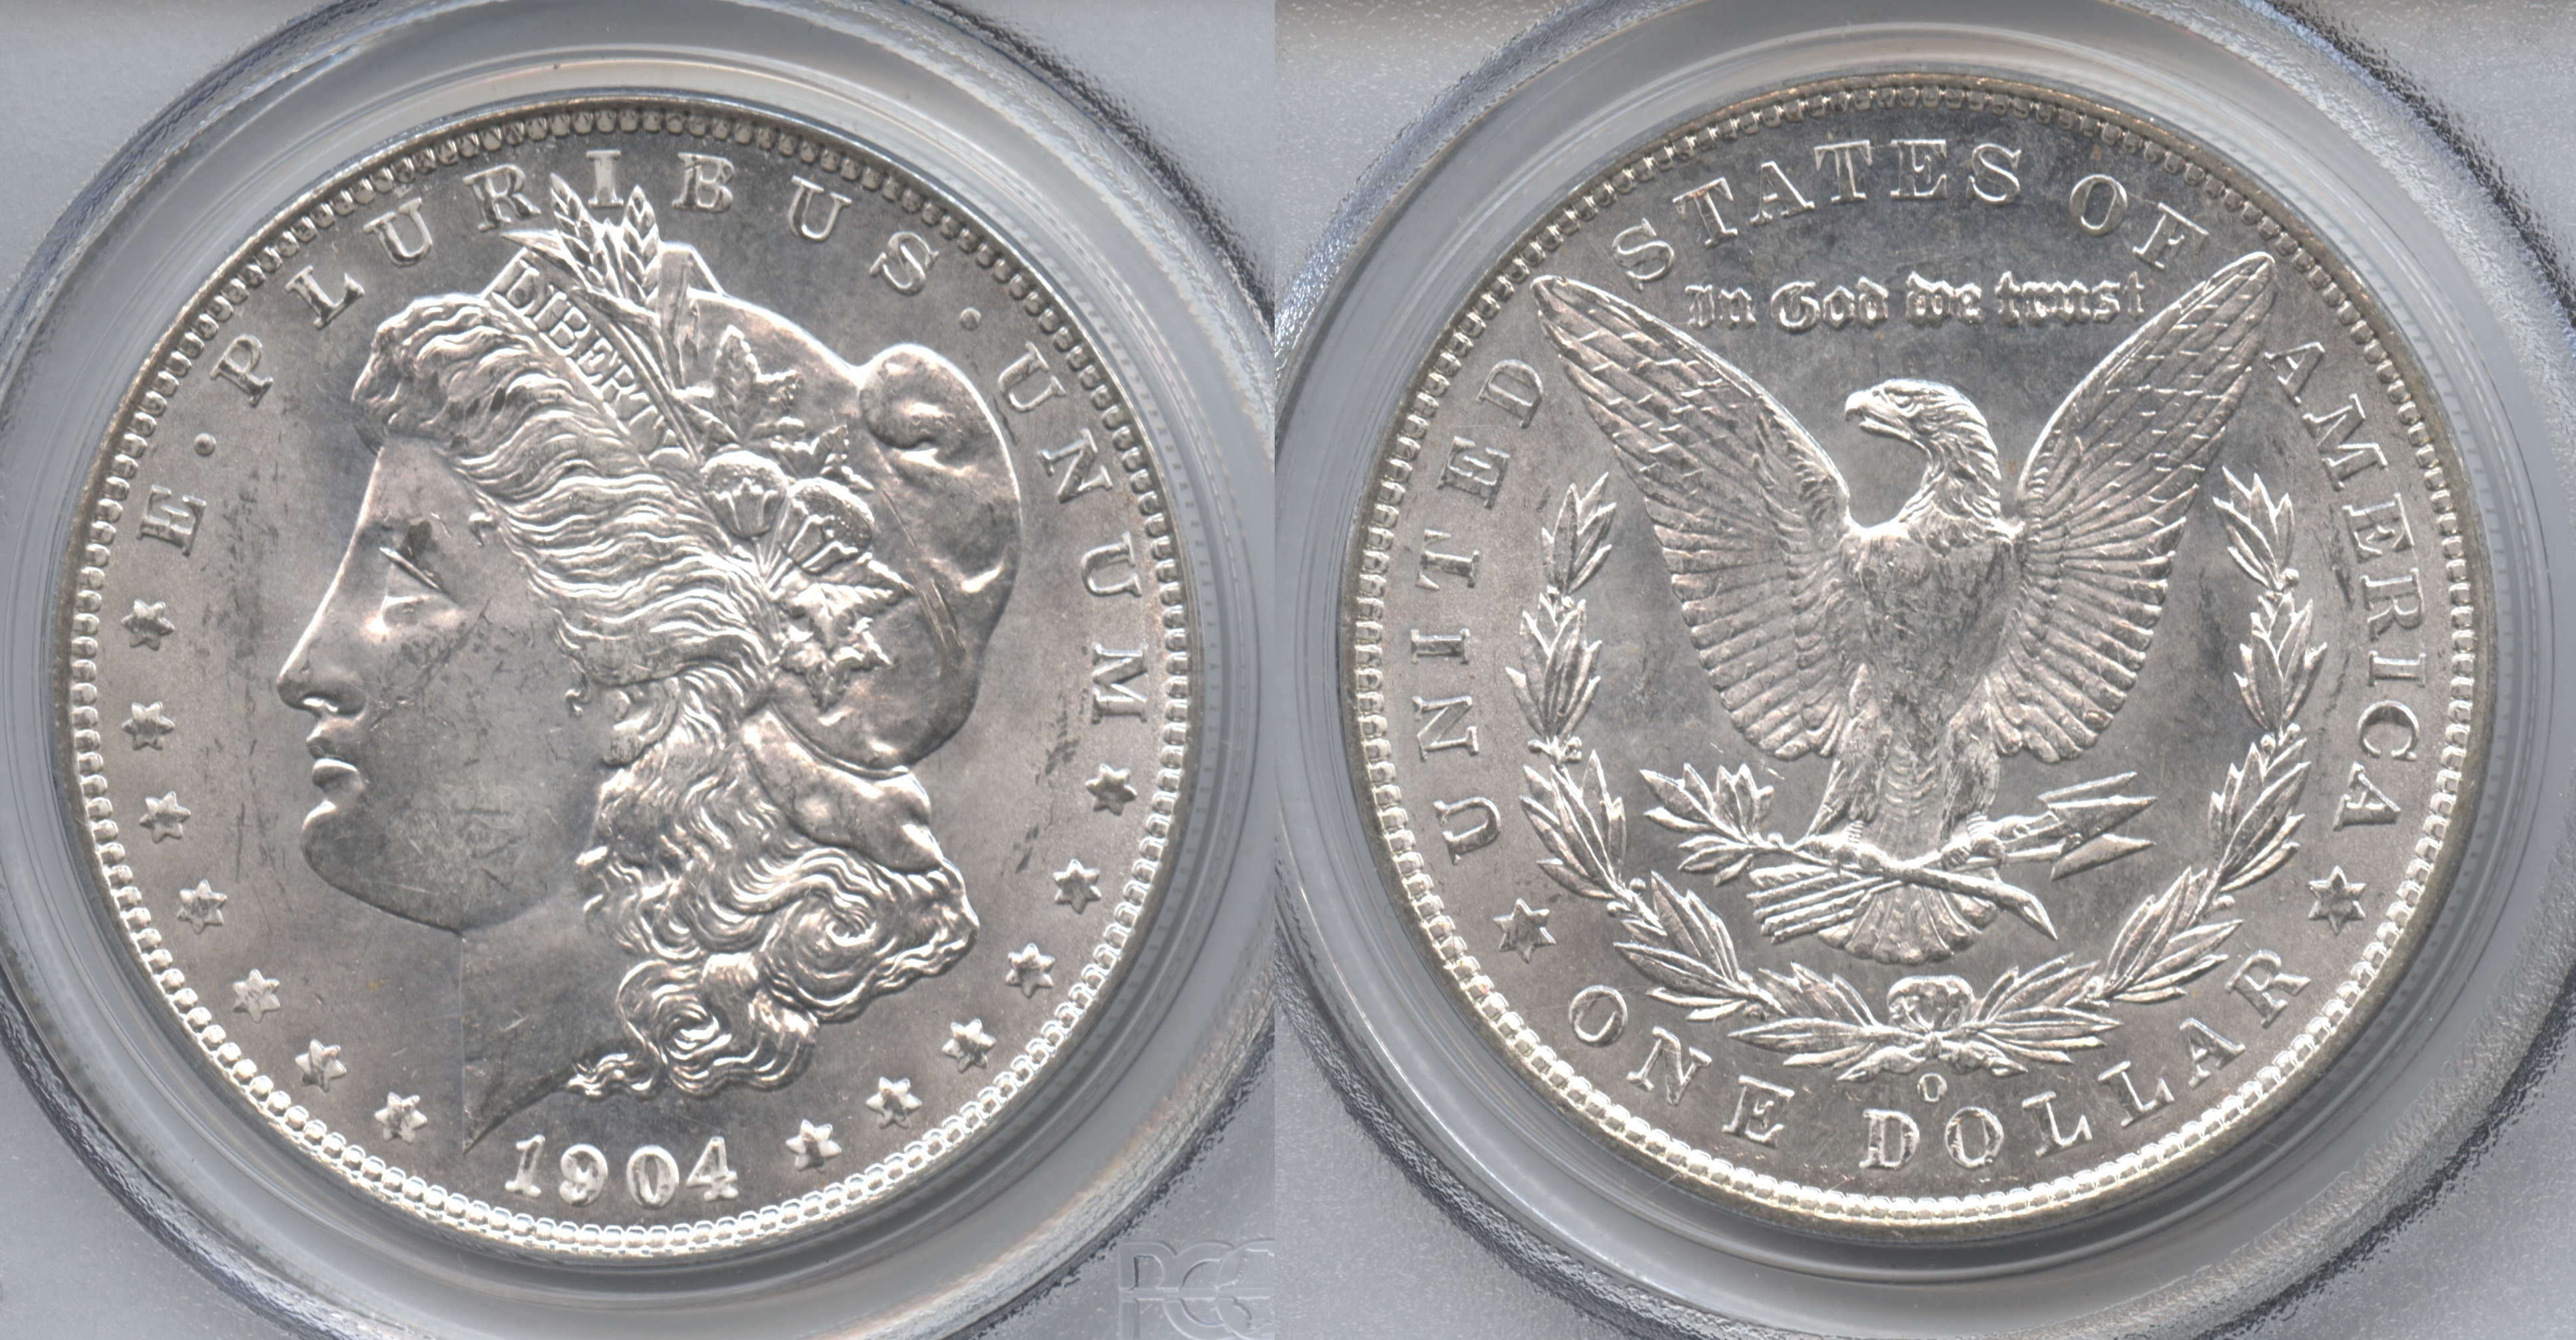 1904-O Morgan Silver Dollar PCGS MS-64 #a VAM-21 Doubled 0 and Profile, High O